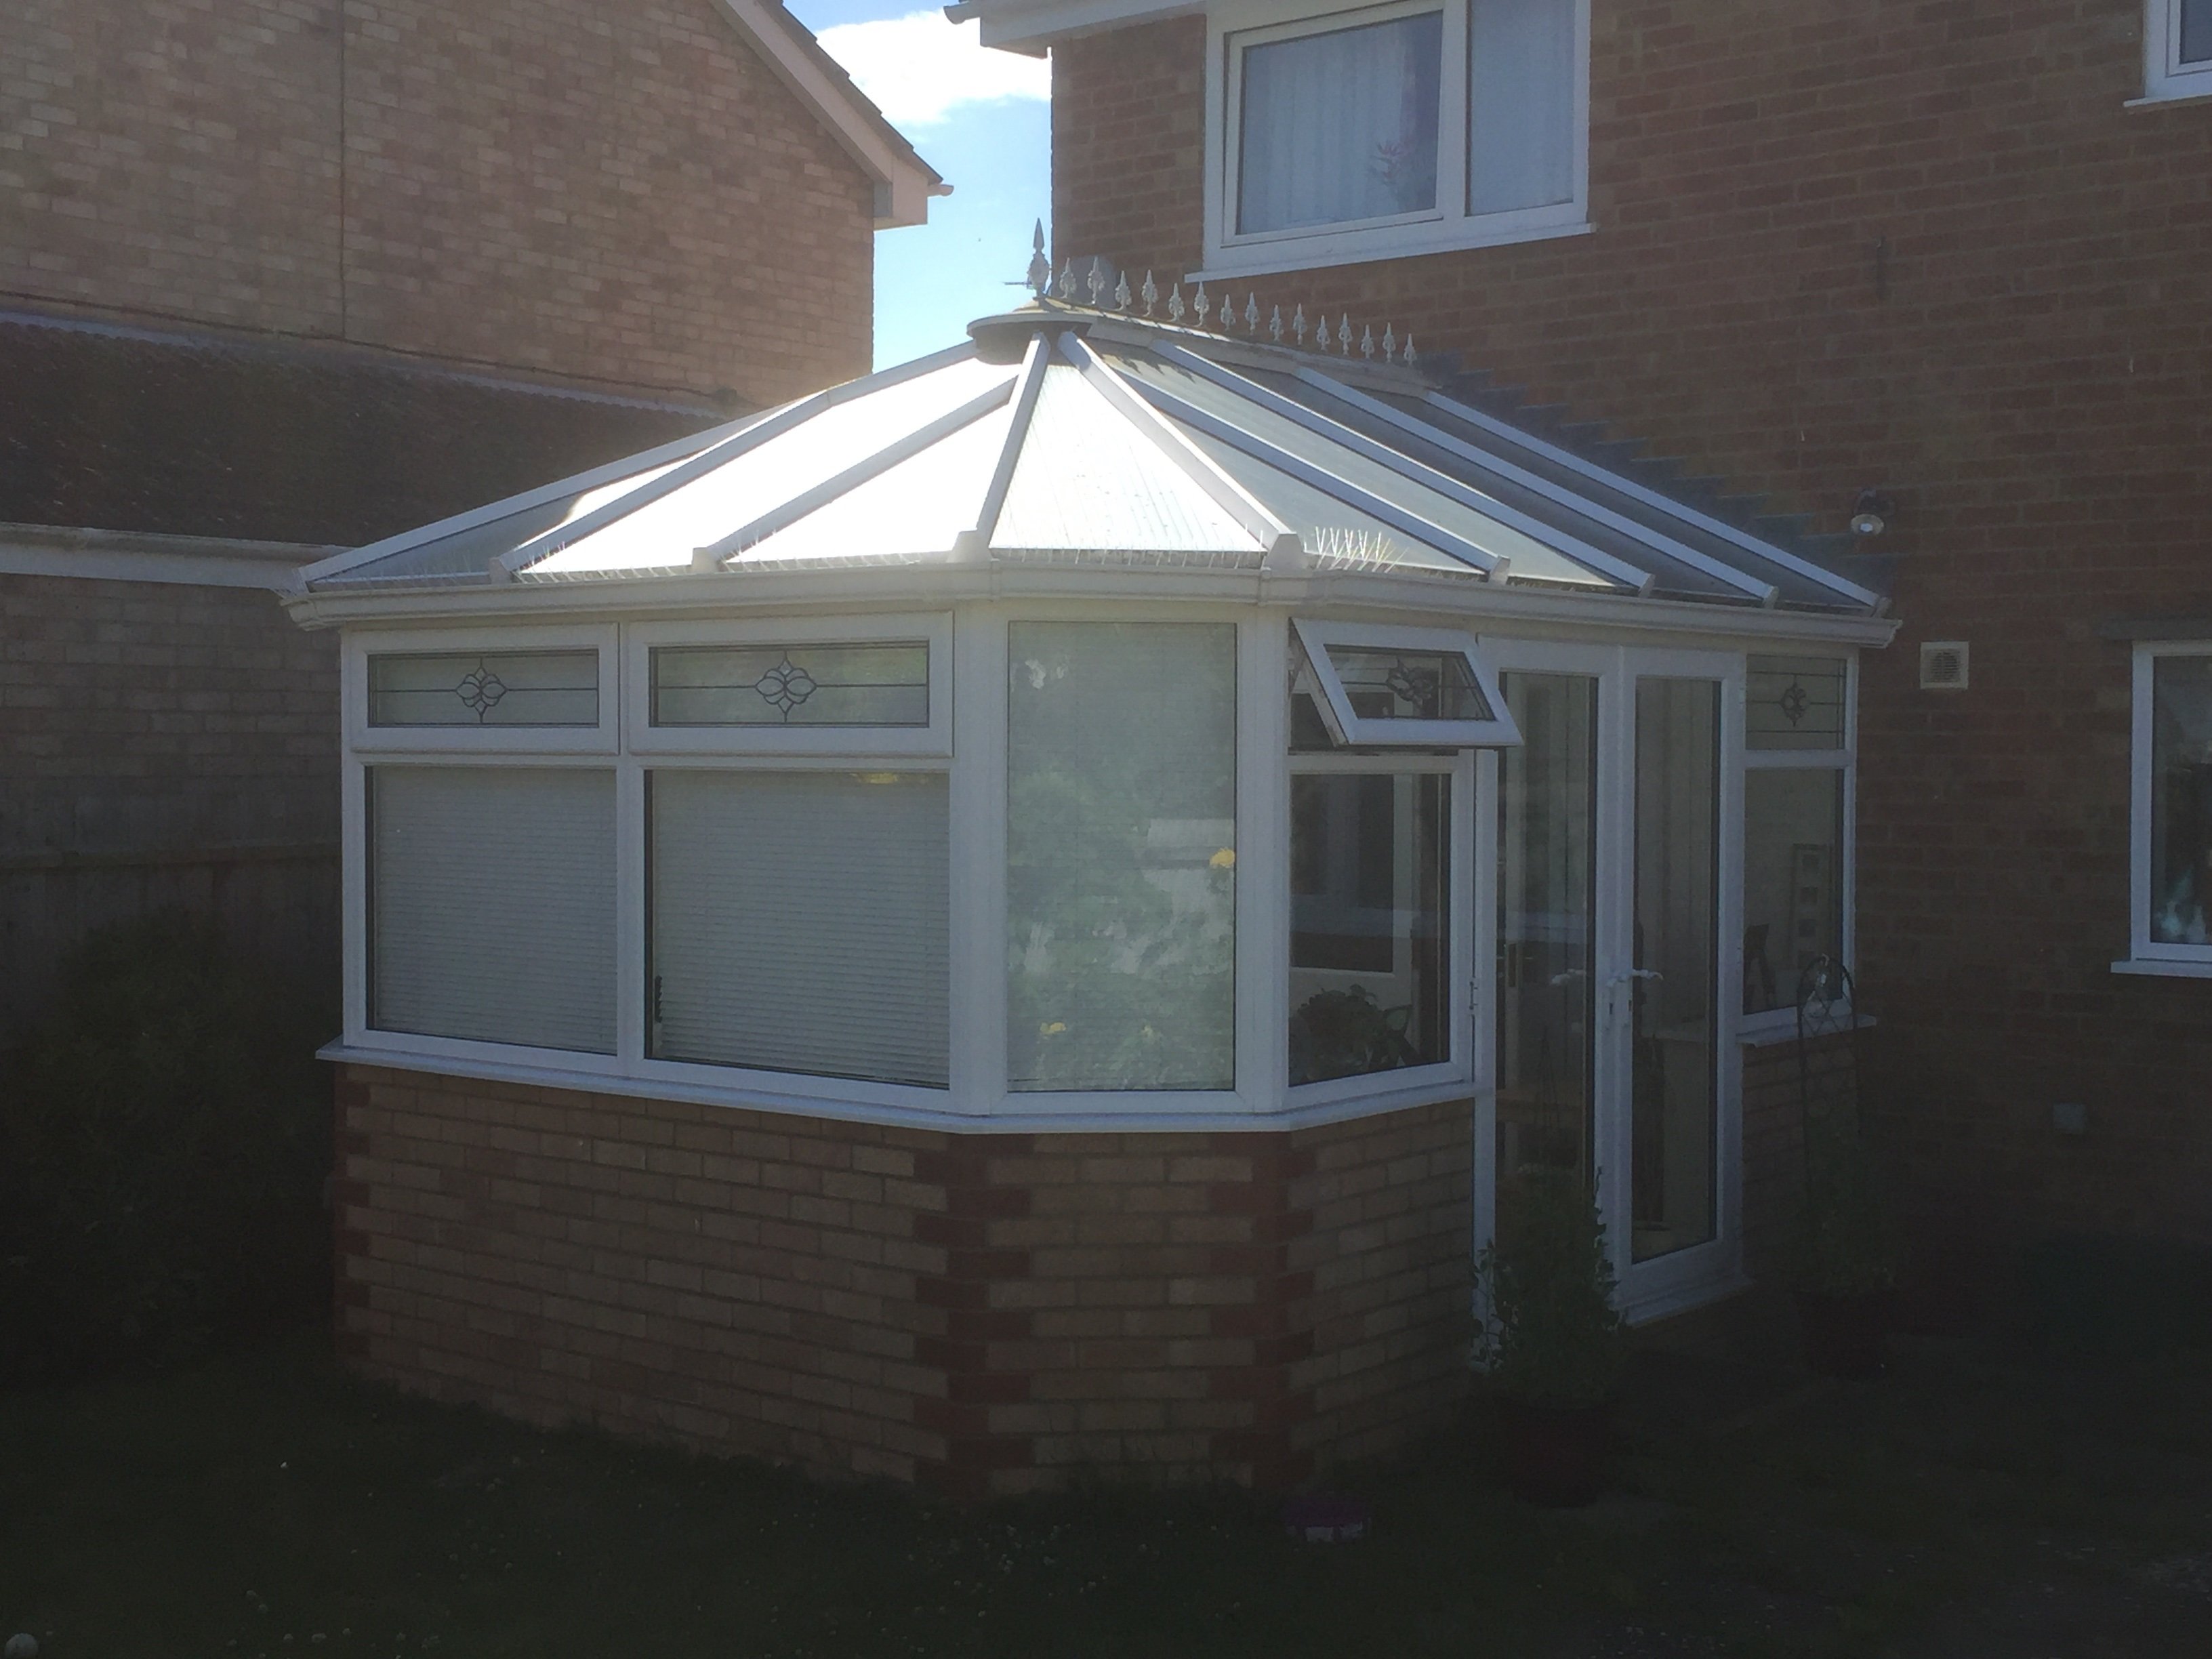 Polycarbonate roof Conservatory before a Conservatory Roof Replacement